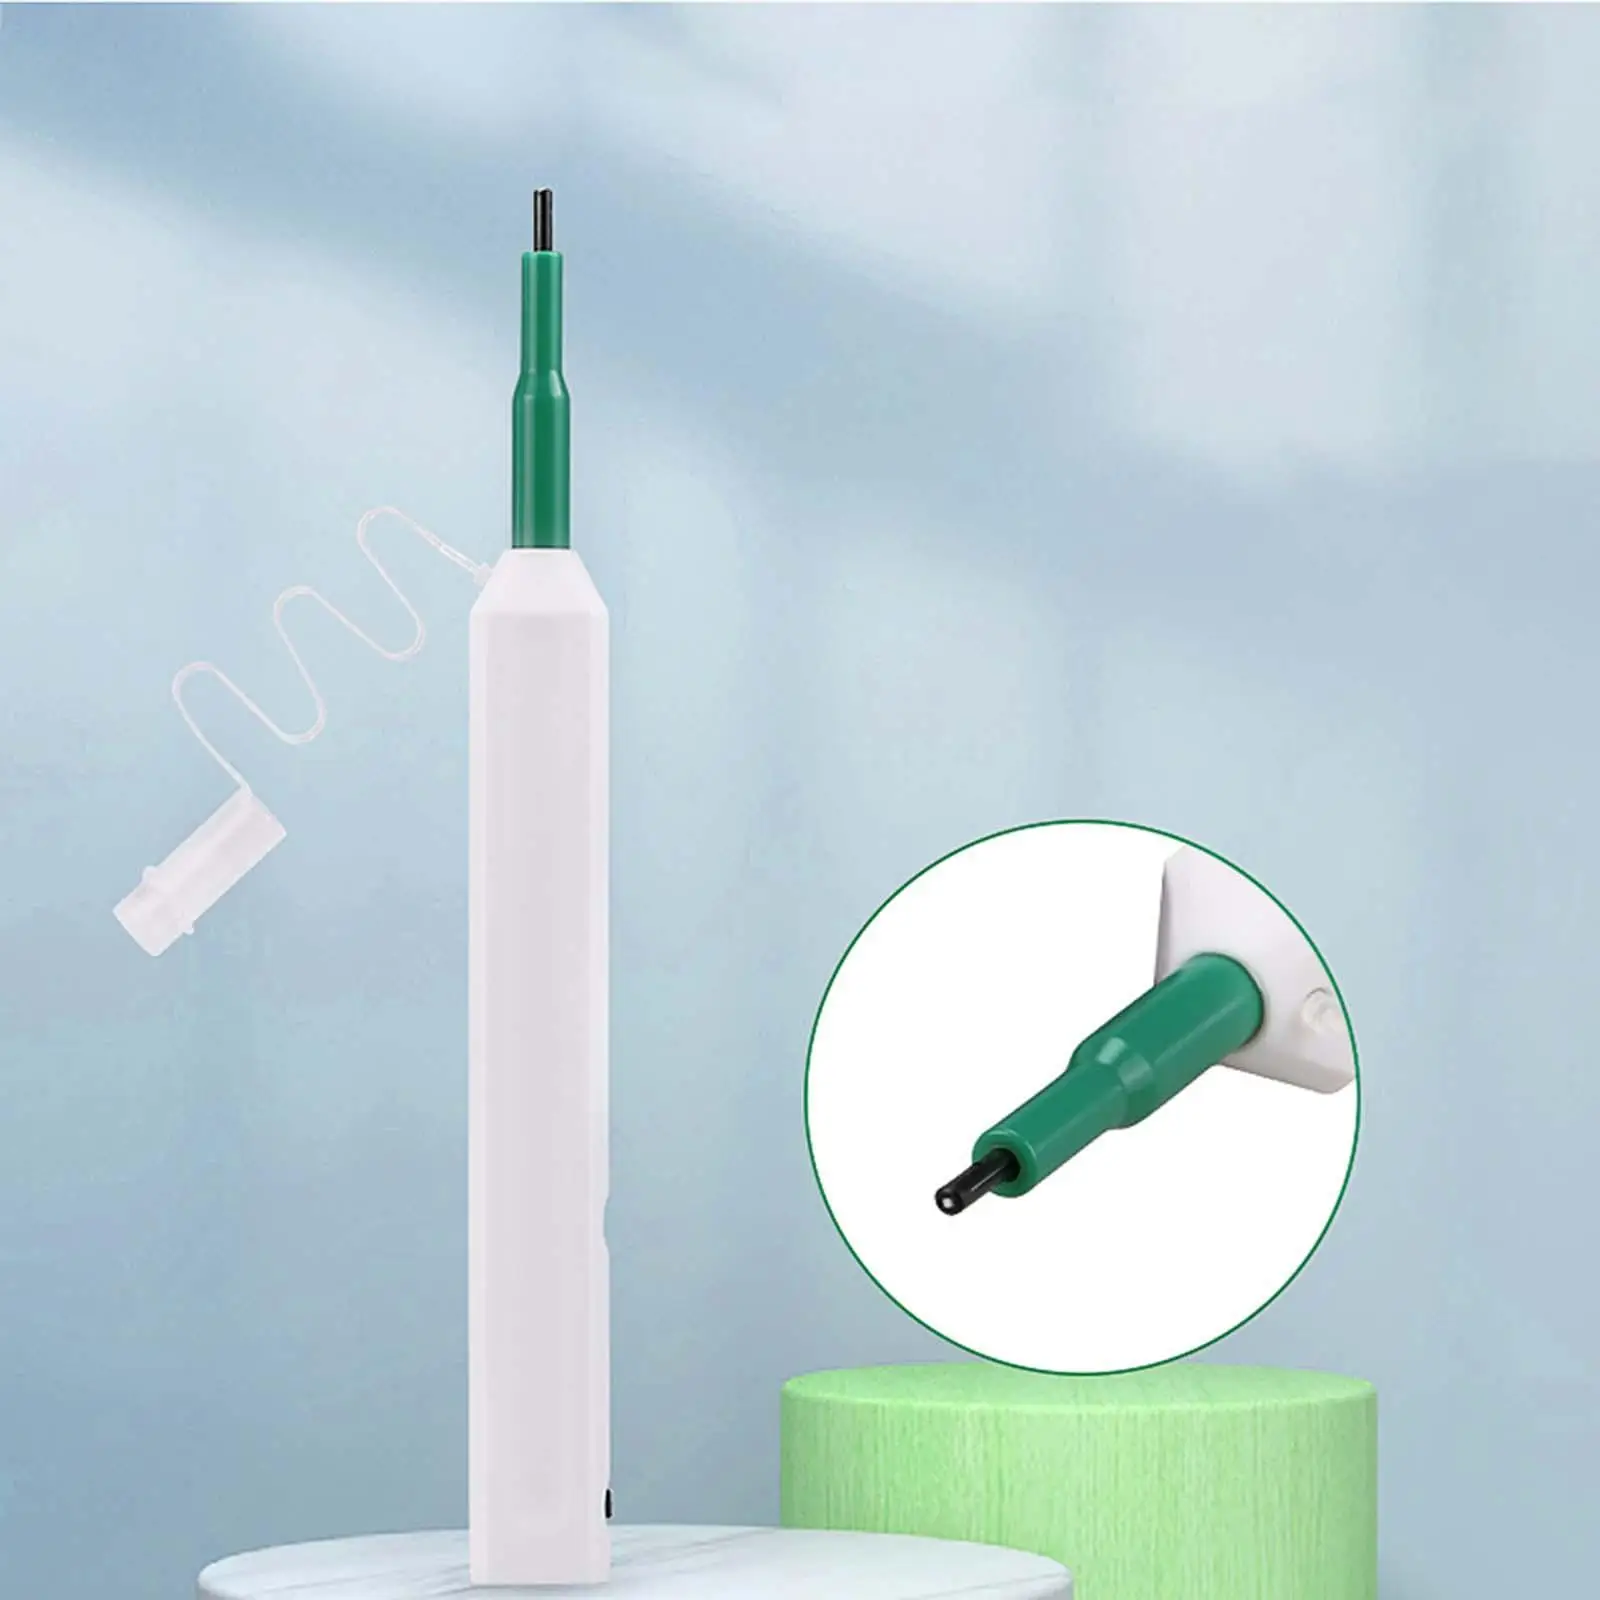 Universal Fiber Optic Cleaner Pen Connector Head Cleaner Lightweight 800 Cleans Pens Tools